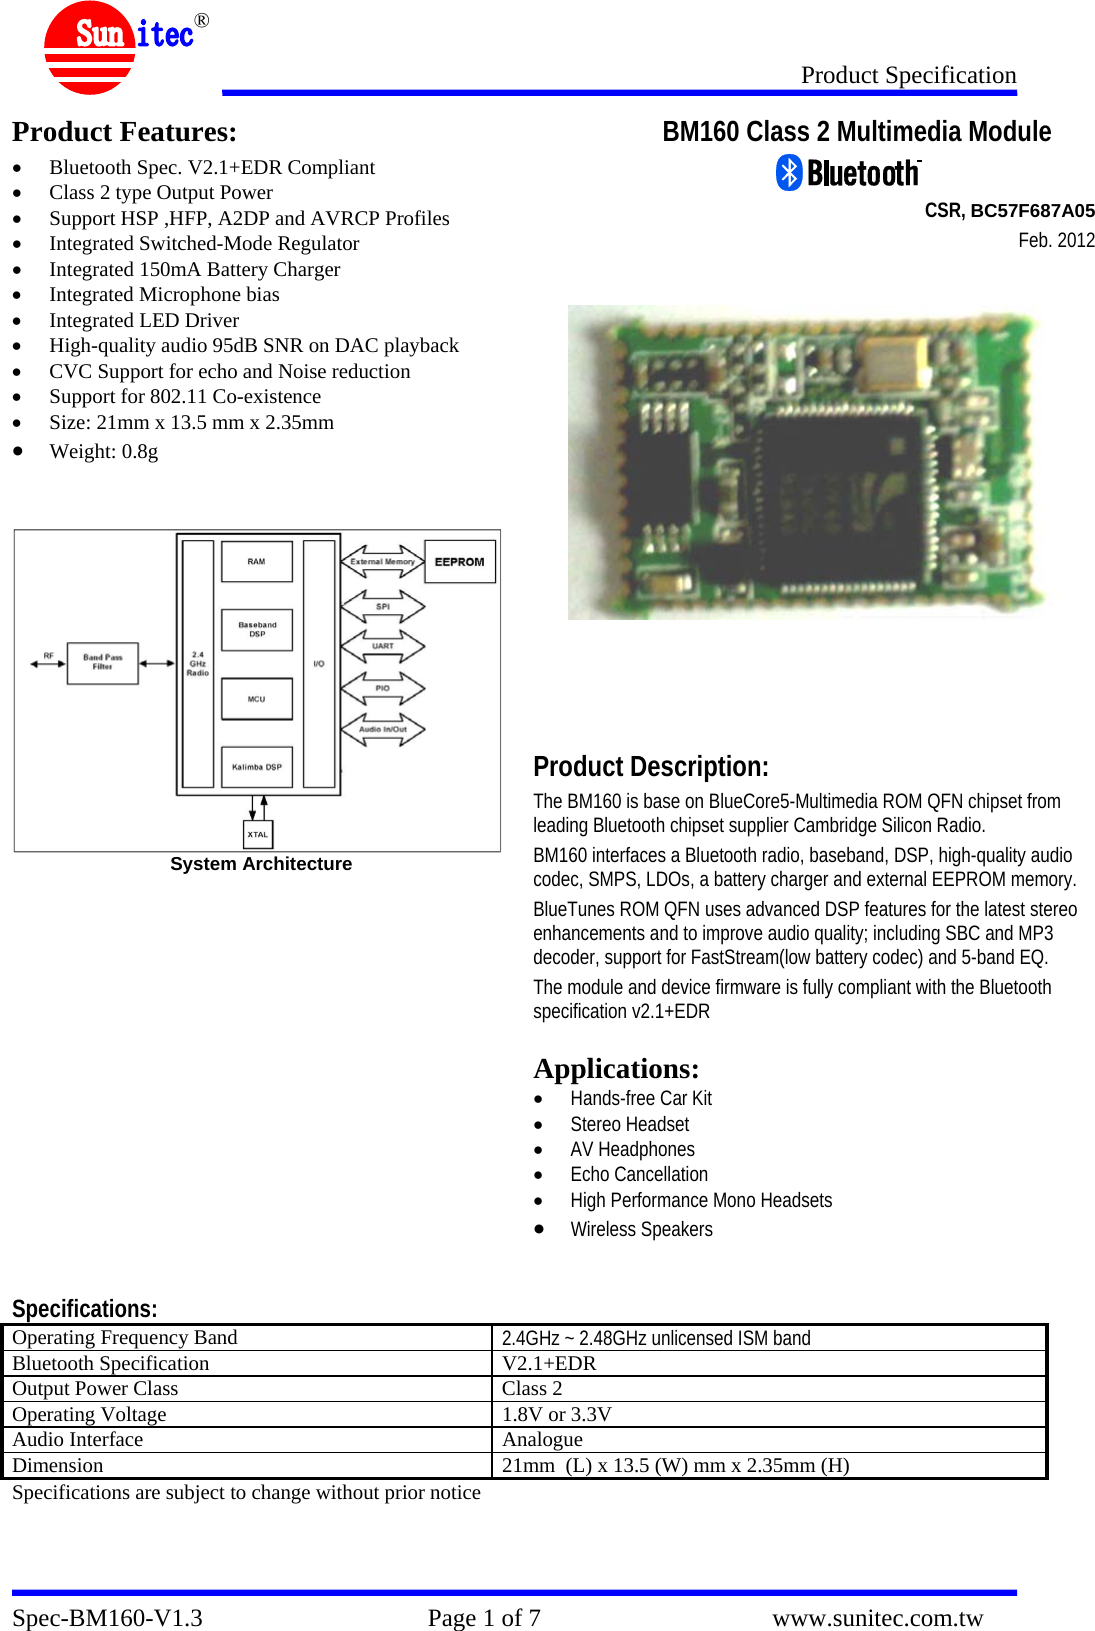 Product Specification Spec-BM160-V1.3                                    Page 1 of 7                                     www.sunitec.com.tw  ® Product Features: • Bluetooth Spec. V2.1+EDR Compliant • Class 2 type Output Power • Support HSP ,HFP, A2DP and AVRCP Profiles • Integrated Switched-Mode Regulator • Integrated 150mA Battery Charger • Integrated Microphone bias • Integrated LED Driver • High-quality audio 95dB SNR on DAC playback • CVC Support for echo and Noise reduction • Support for 802.11 Co-existence • Size: 21mm x 13.5 mm x 2.35mm • Weight: 0.8g   System Architecture  BM160 Class 2 Multimedia Module                                                                                  CSR, BC57F687A05                          Feb. 2012          Product Description: The BM160 is base on BlueCore5-Multimedia ROM QFN chipset from leading Bluetooth chipset supplier Cambridge Silicon Radio.  BM160 interfaces a Bluetooth radio, baseband, DSP, high-quality audio codec, SMPS, LDOs, a battery charger and external EEPROM memory. BlueTunes ROM QFN uses advanced DSP features for the latest stereo enhancements and to improve audio quality; including SBC and MP3 decoder, support for FastStream(low battery codec) and 5-band EQ. The module and device firmware is fully compliant with the Bluetooth specification v2.1+EDR  Applications: • Hands-free Car Kit • Stereo Headset • AV Headphones • Echo Cancellation • High Performance Mono Headsets • Wireless Speakers   Specifications: Operating Frequency Band  2.4GHz ~ 2.48GHz unlicensed ISM band Bluetooth Specification  V2.1+EDR Output Power Class  Class 2 Operating Voltage  1.8V or 3.3V Audio Interface  Analogue Dimension  21mm  (L) x 13.5 (W) mm x 2.35mm (H) Specifications are subject to change without prior notice  